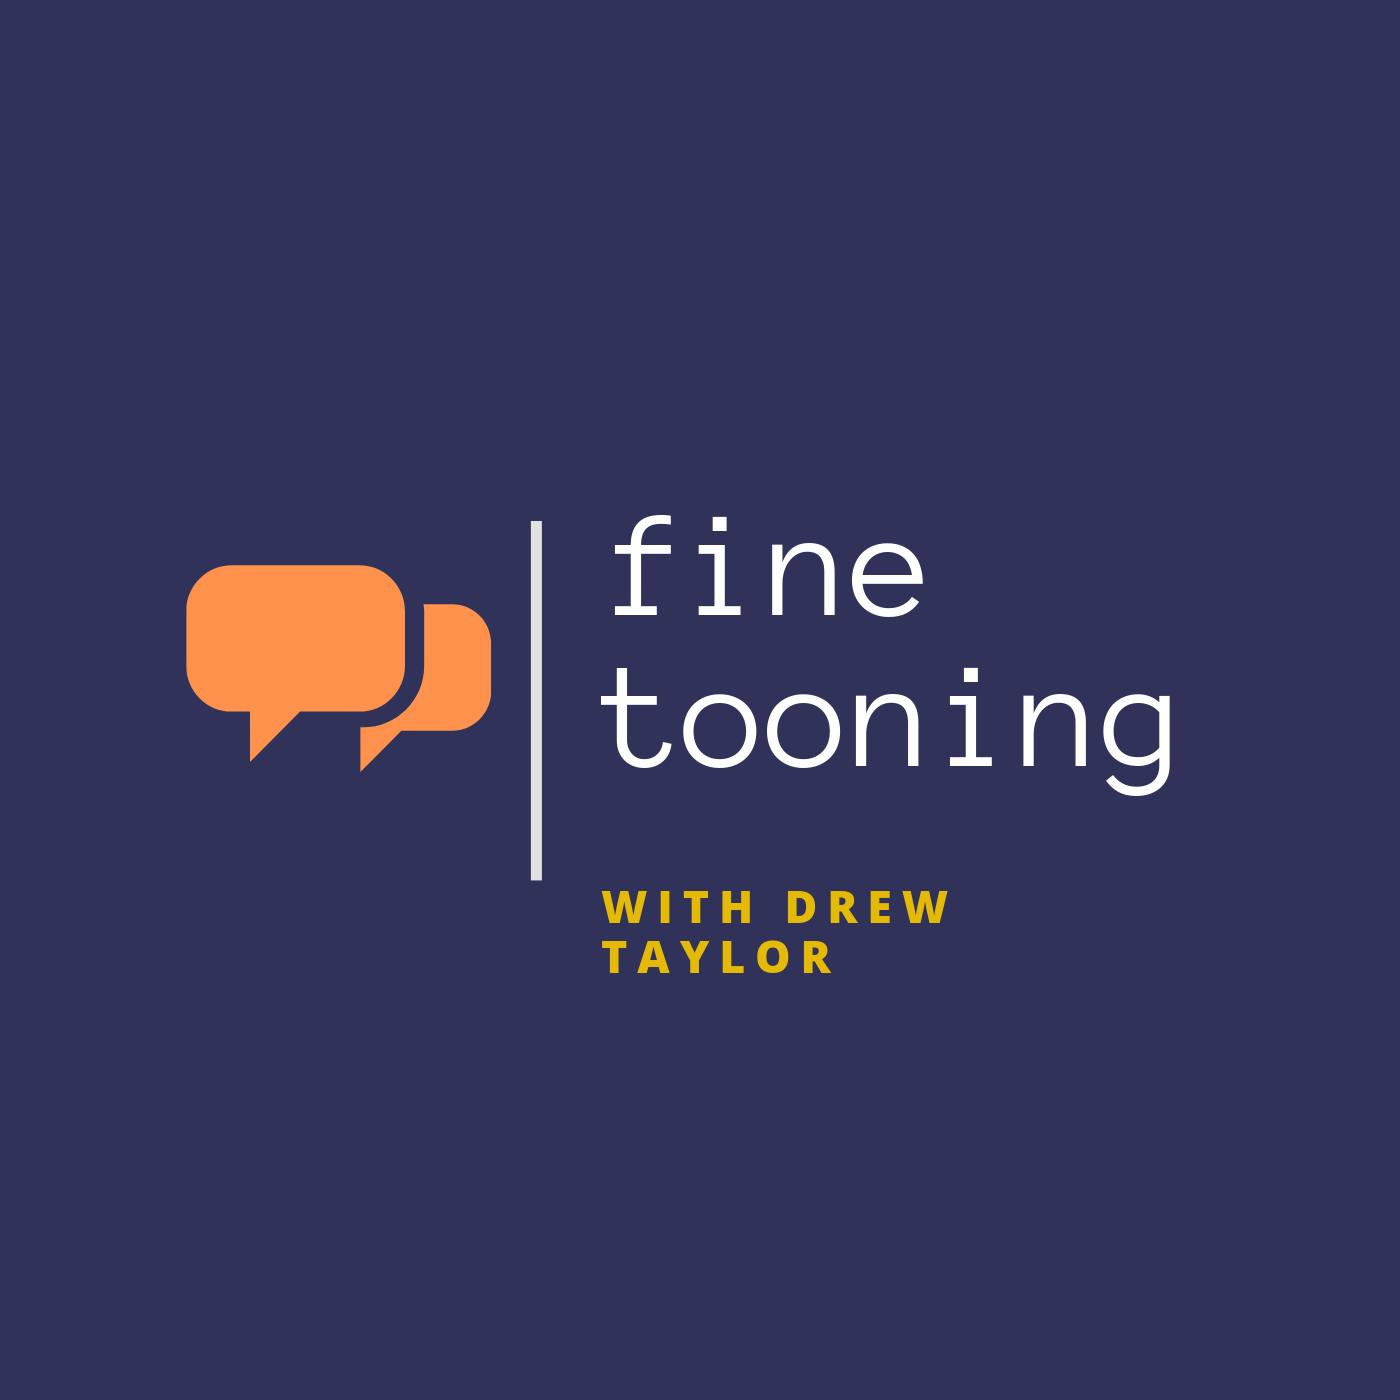 Fine Tooning with Drew Taylor - Episode 102: Who John Candy almost voiced in Disney’s “Pocahontas”